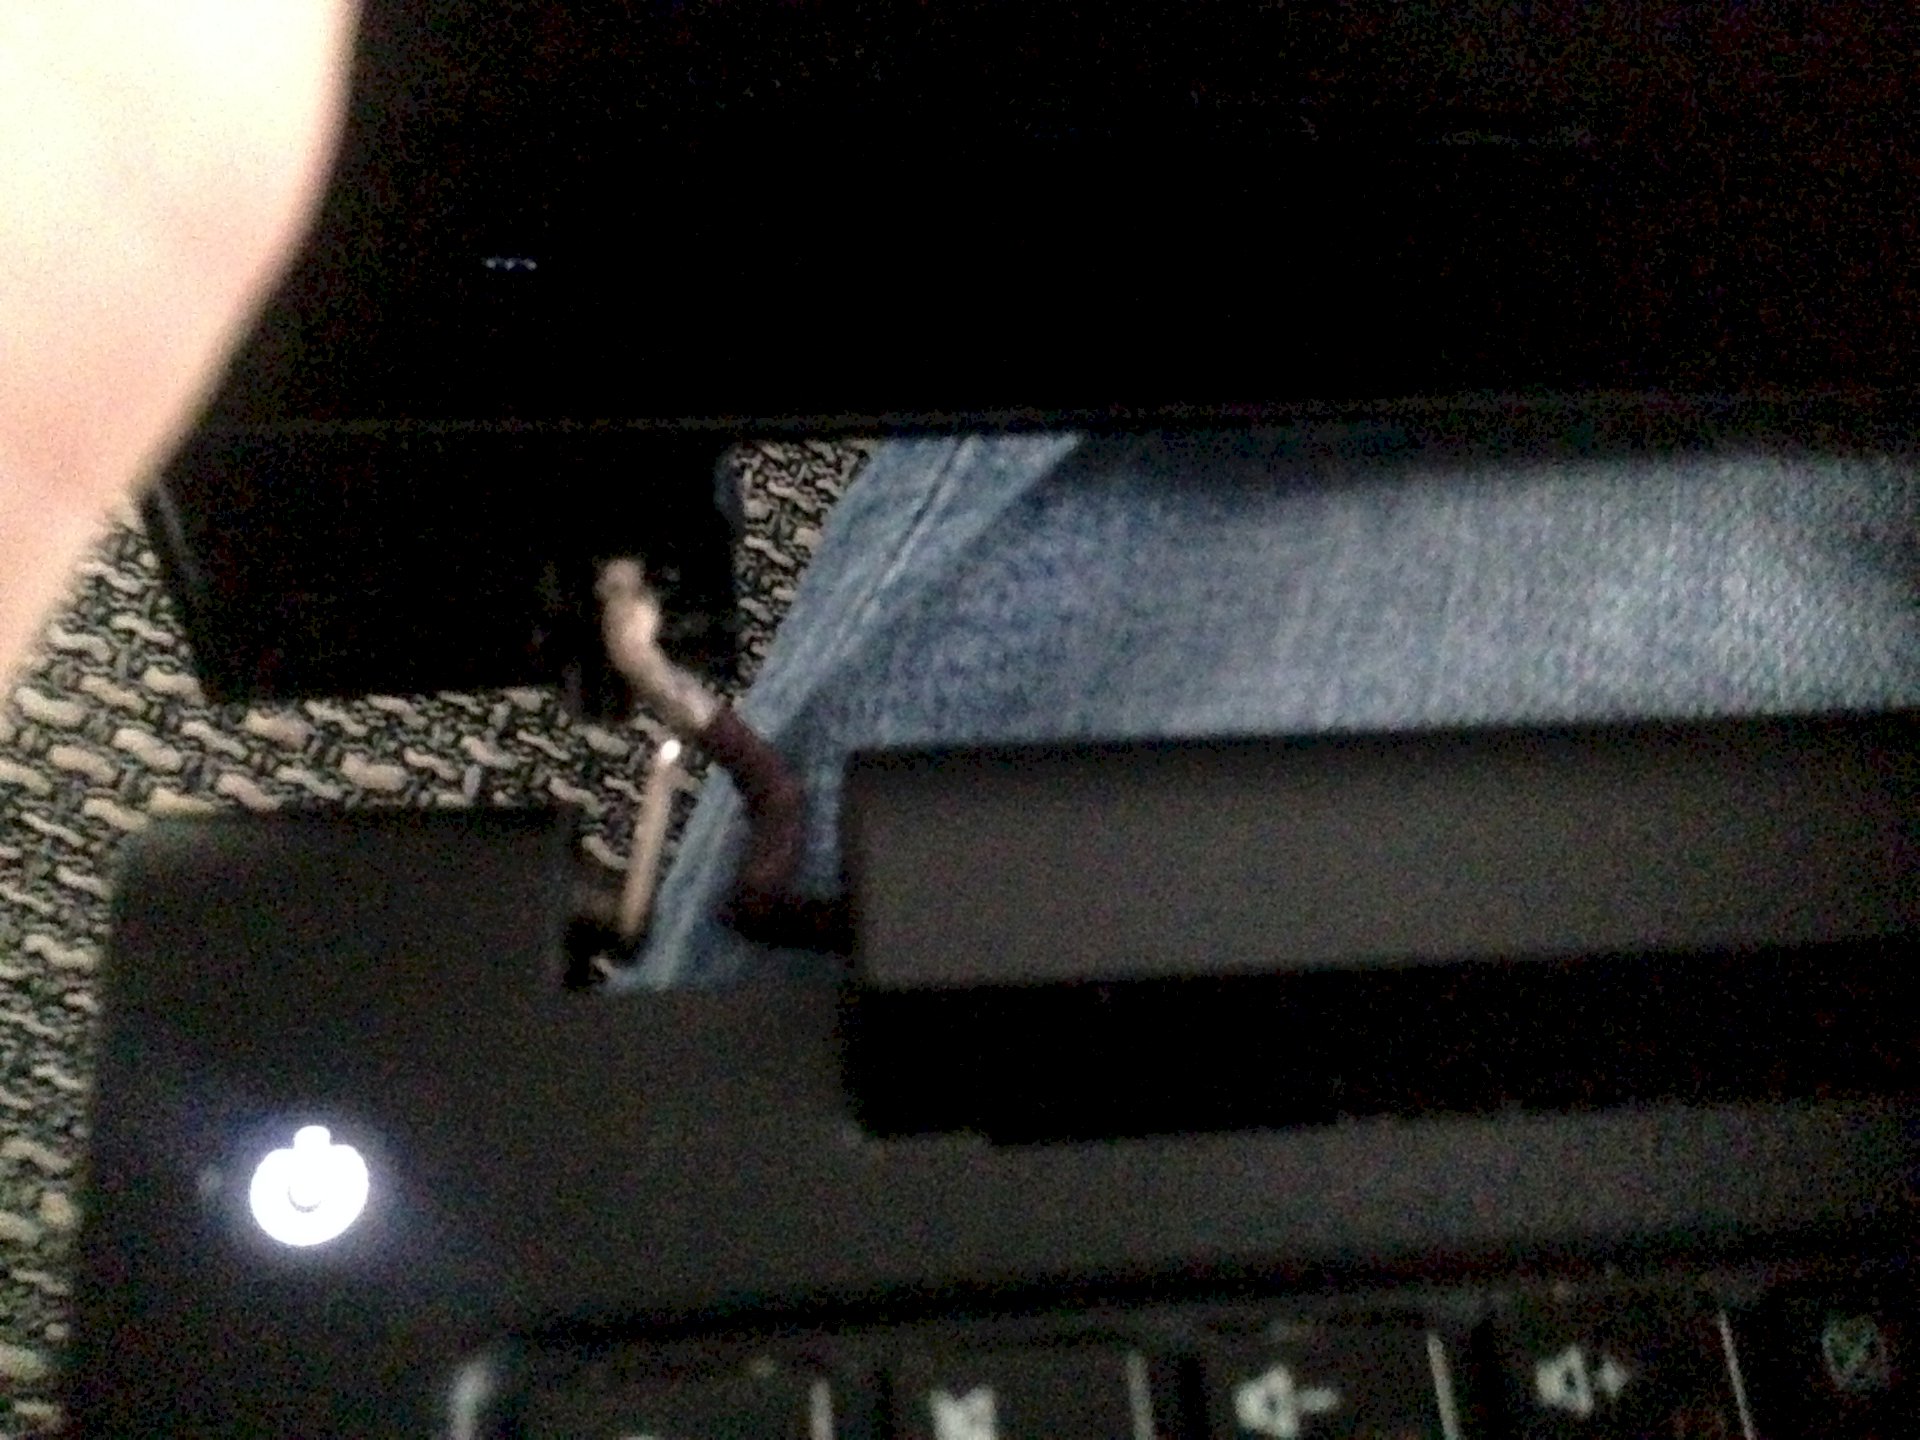 Laptop: Hinges broken and cables ripped, what can I do - 1